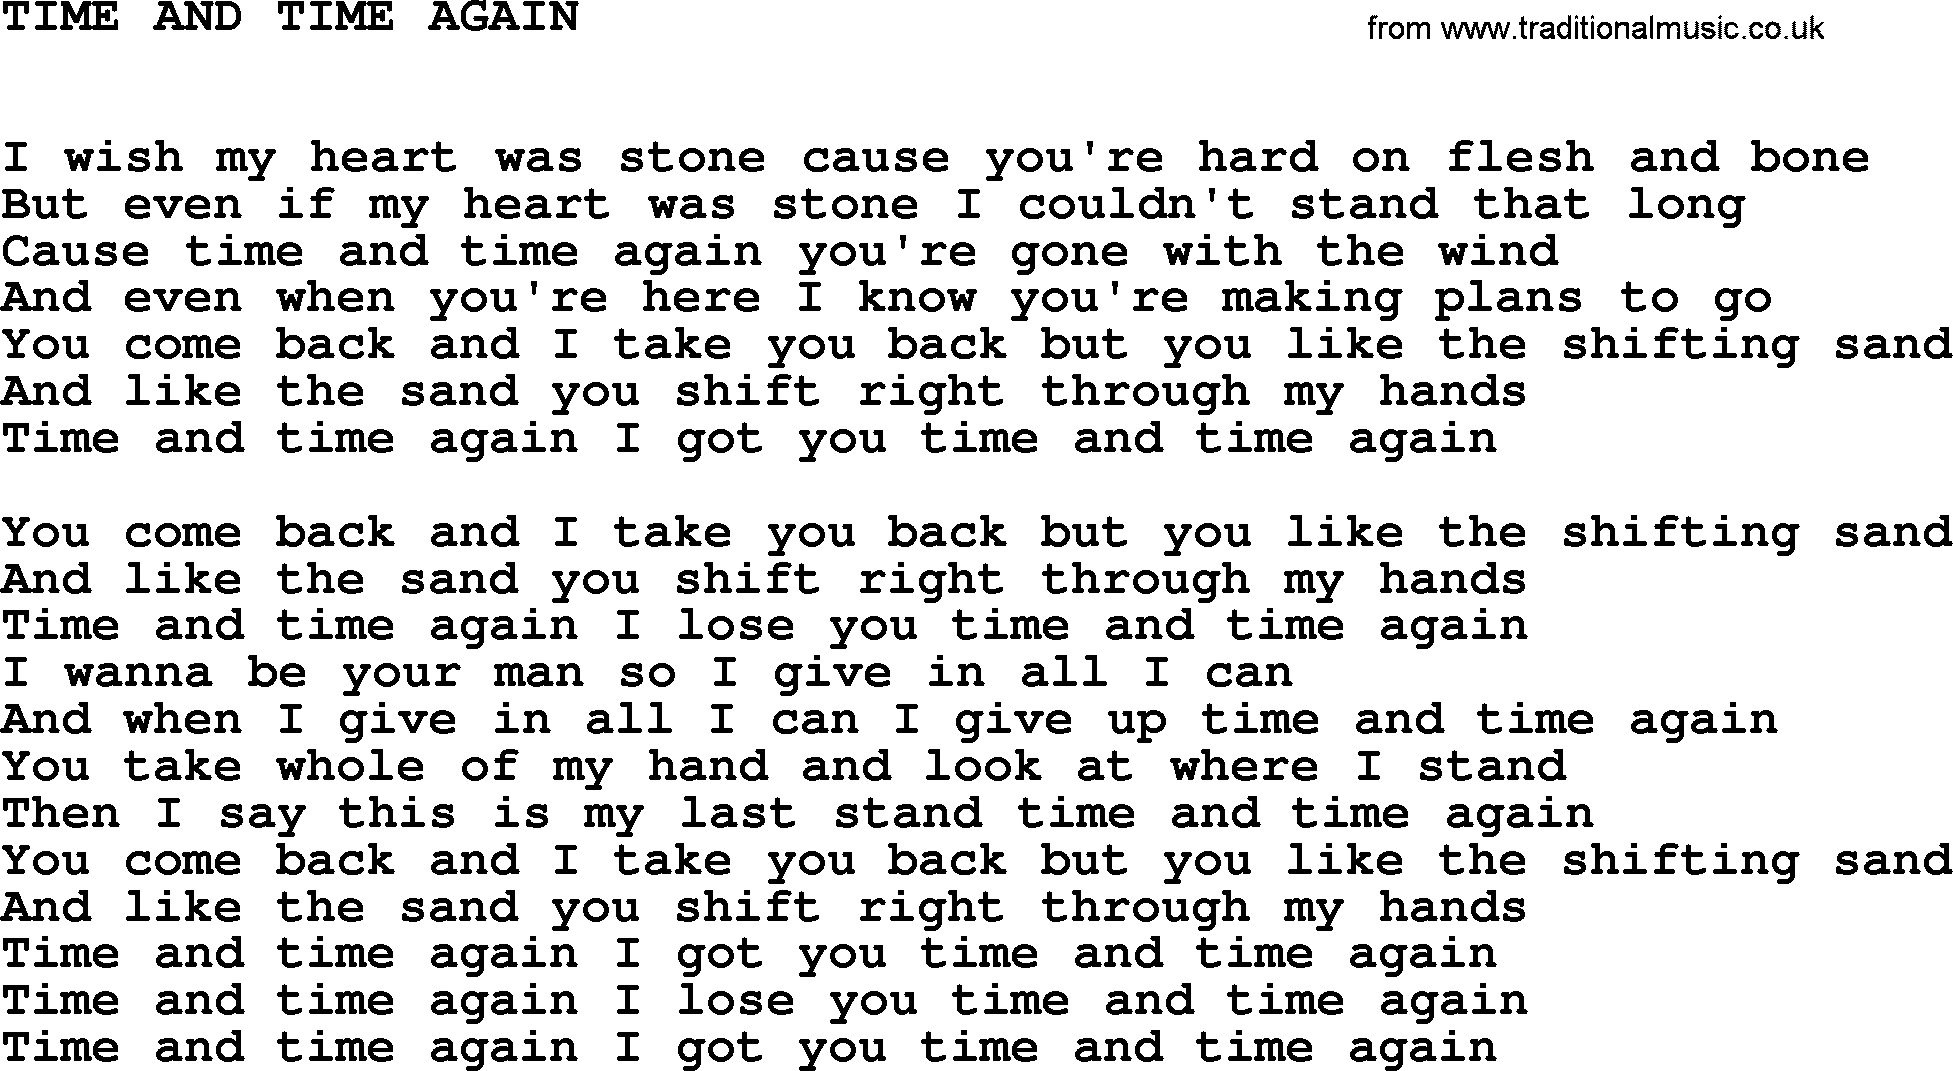 Johnny Cash song Time And Time Again.txt lyrics